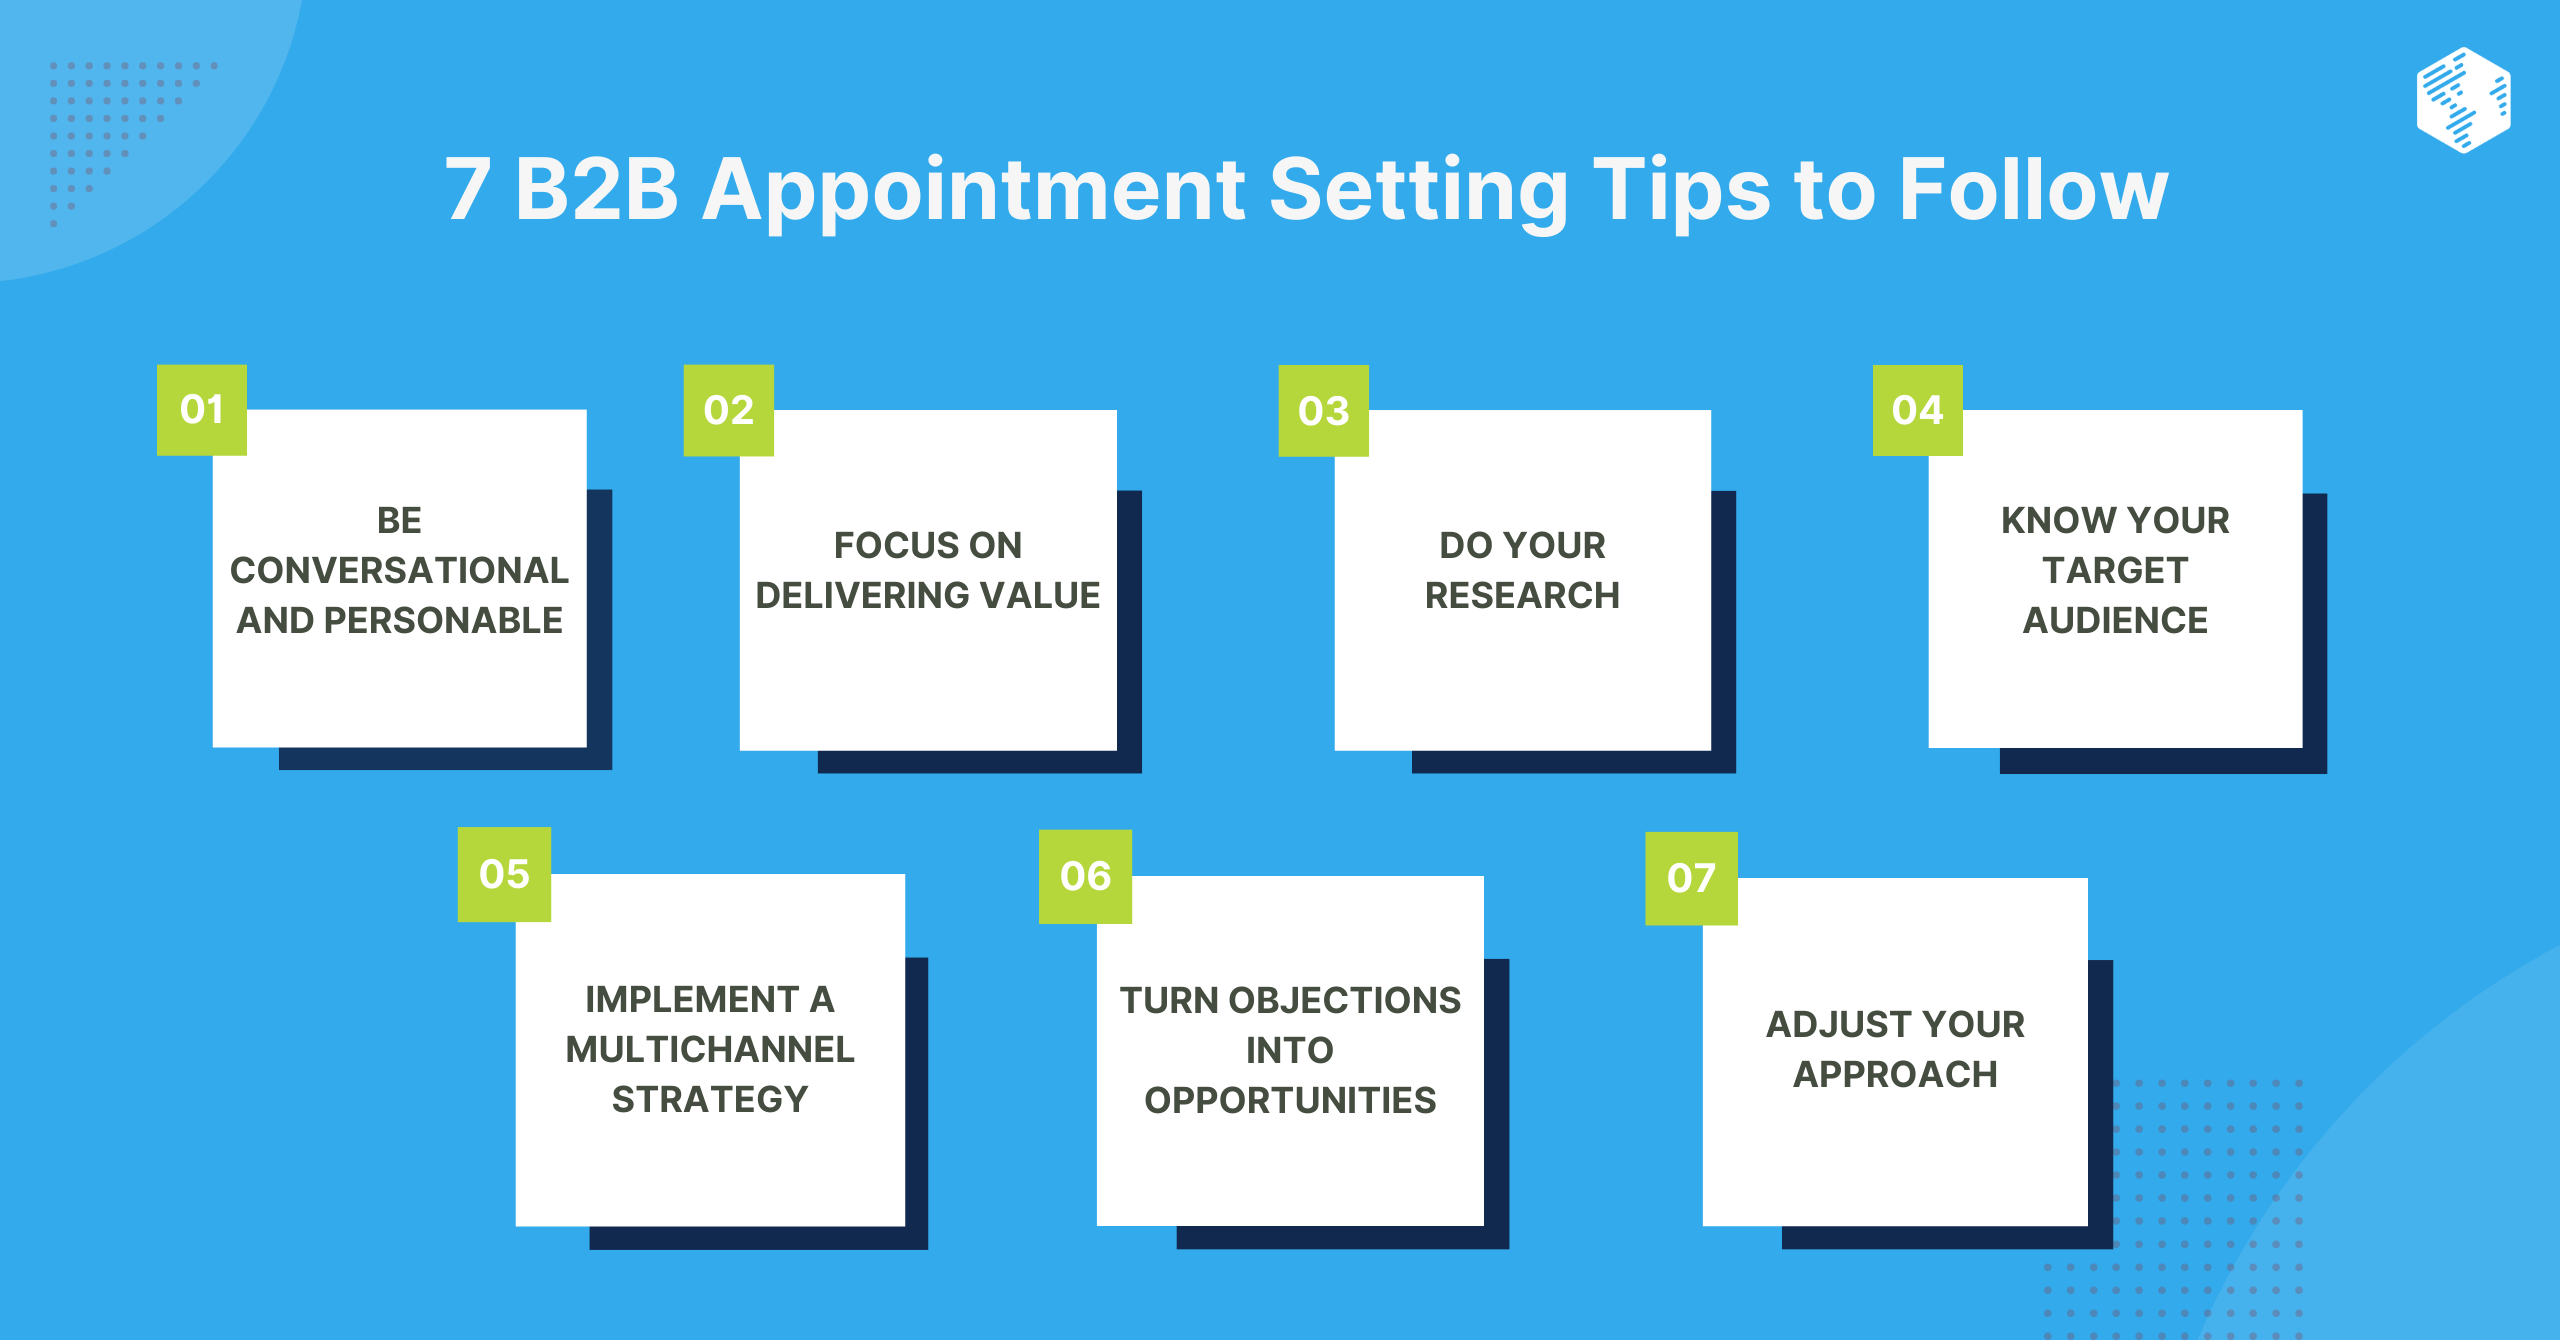 B2B Appointment Setting Tips